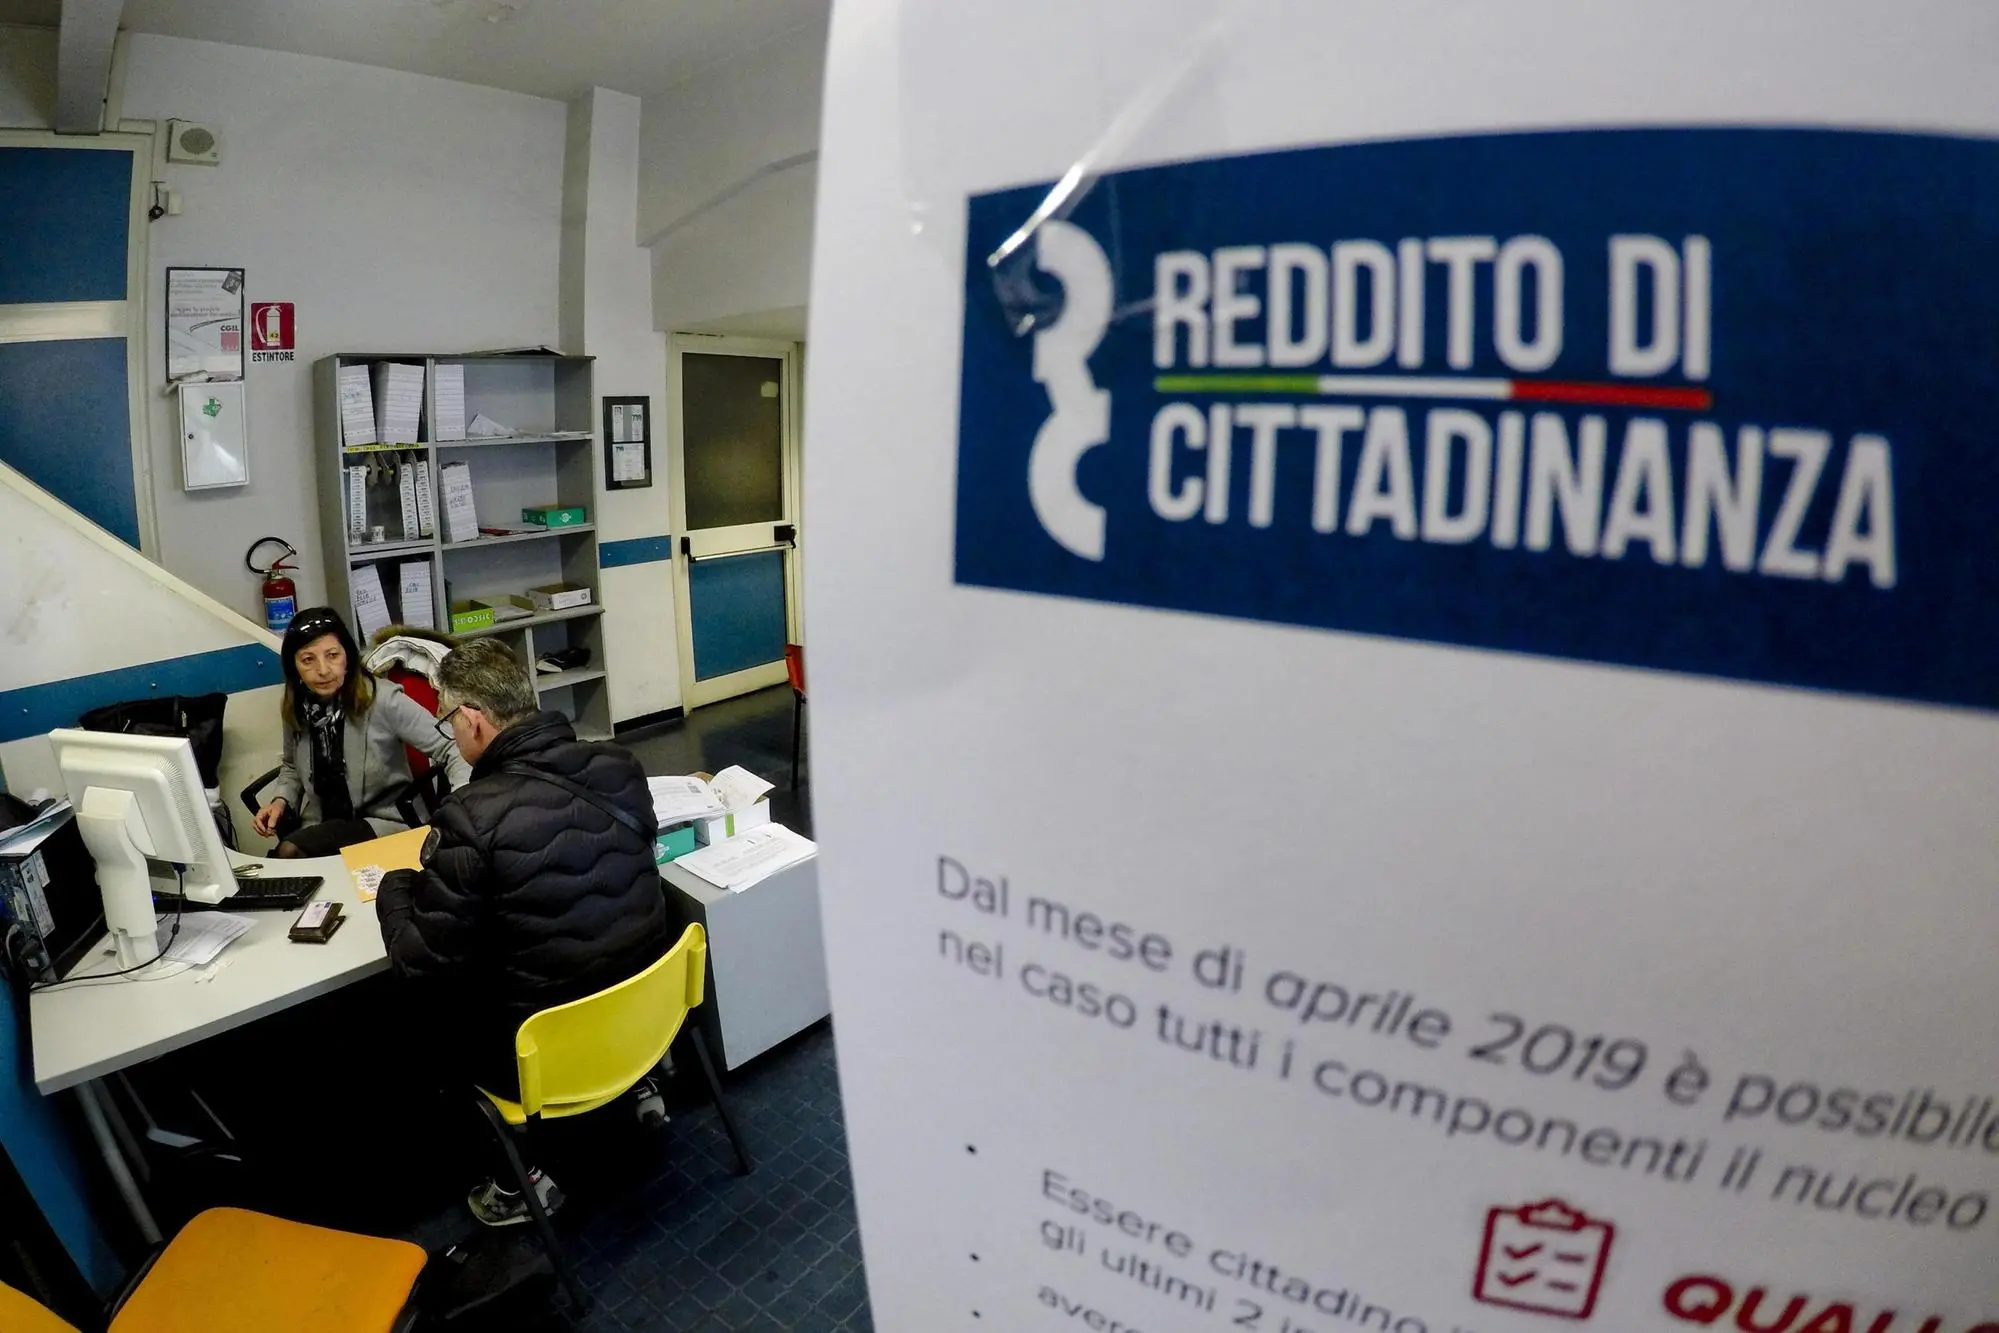 People attend to request for citizenship wage in a CGIL CAF (Centro Assistenza Fiscale - Fiscal Assistance Center) in Naples, Italy,06 March 2019. ANSA / CIRO FUSCO